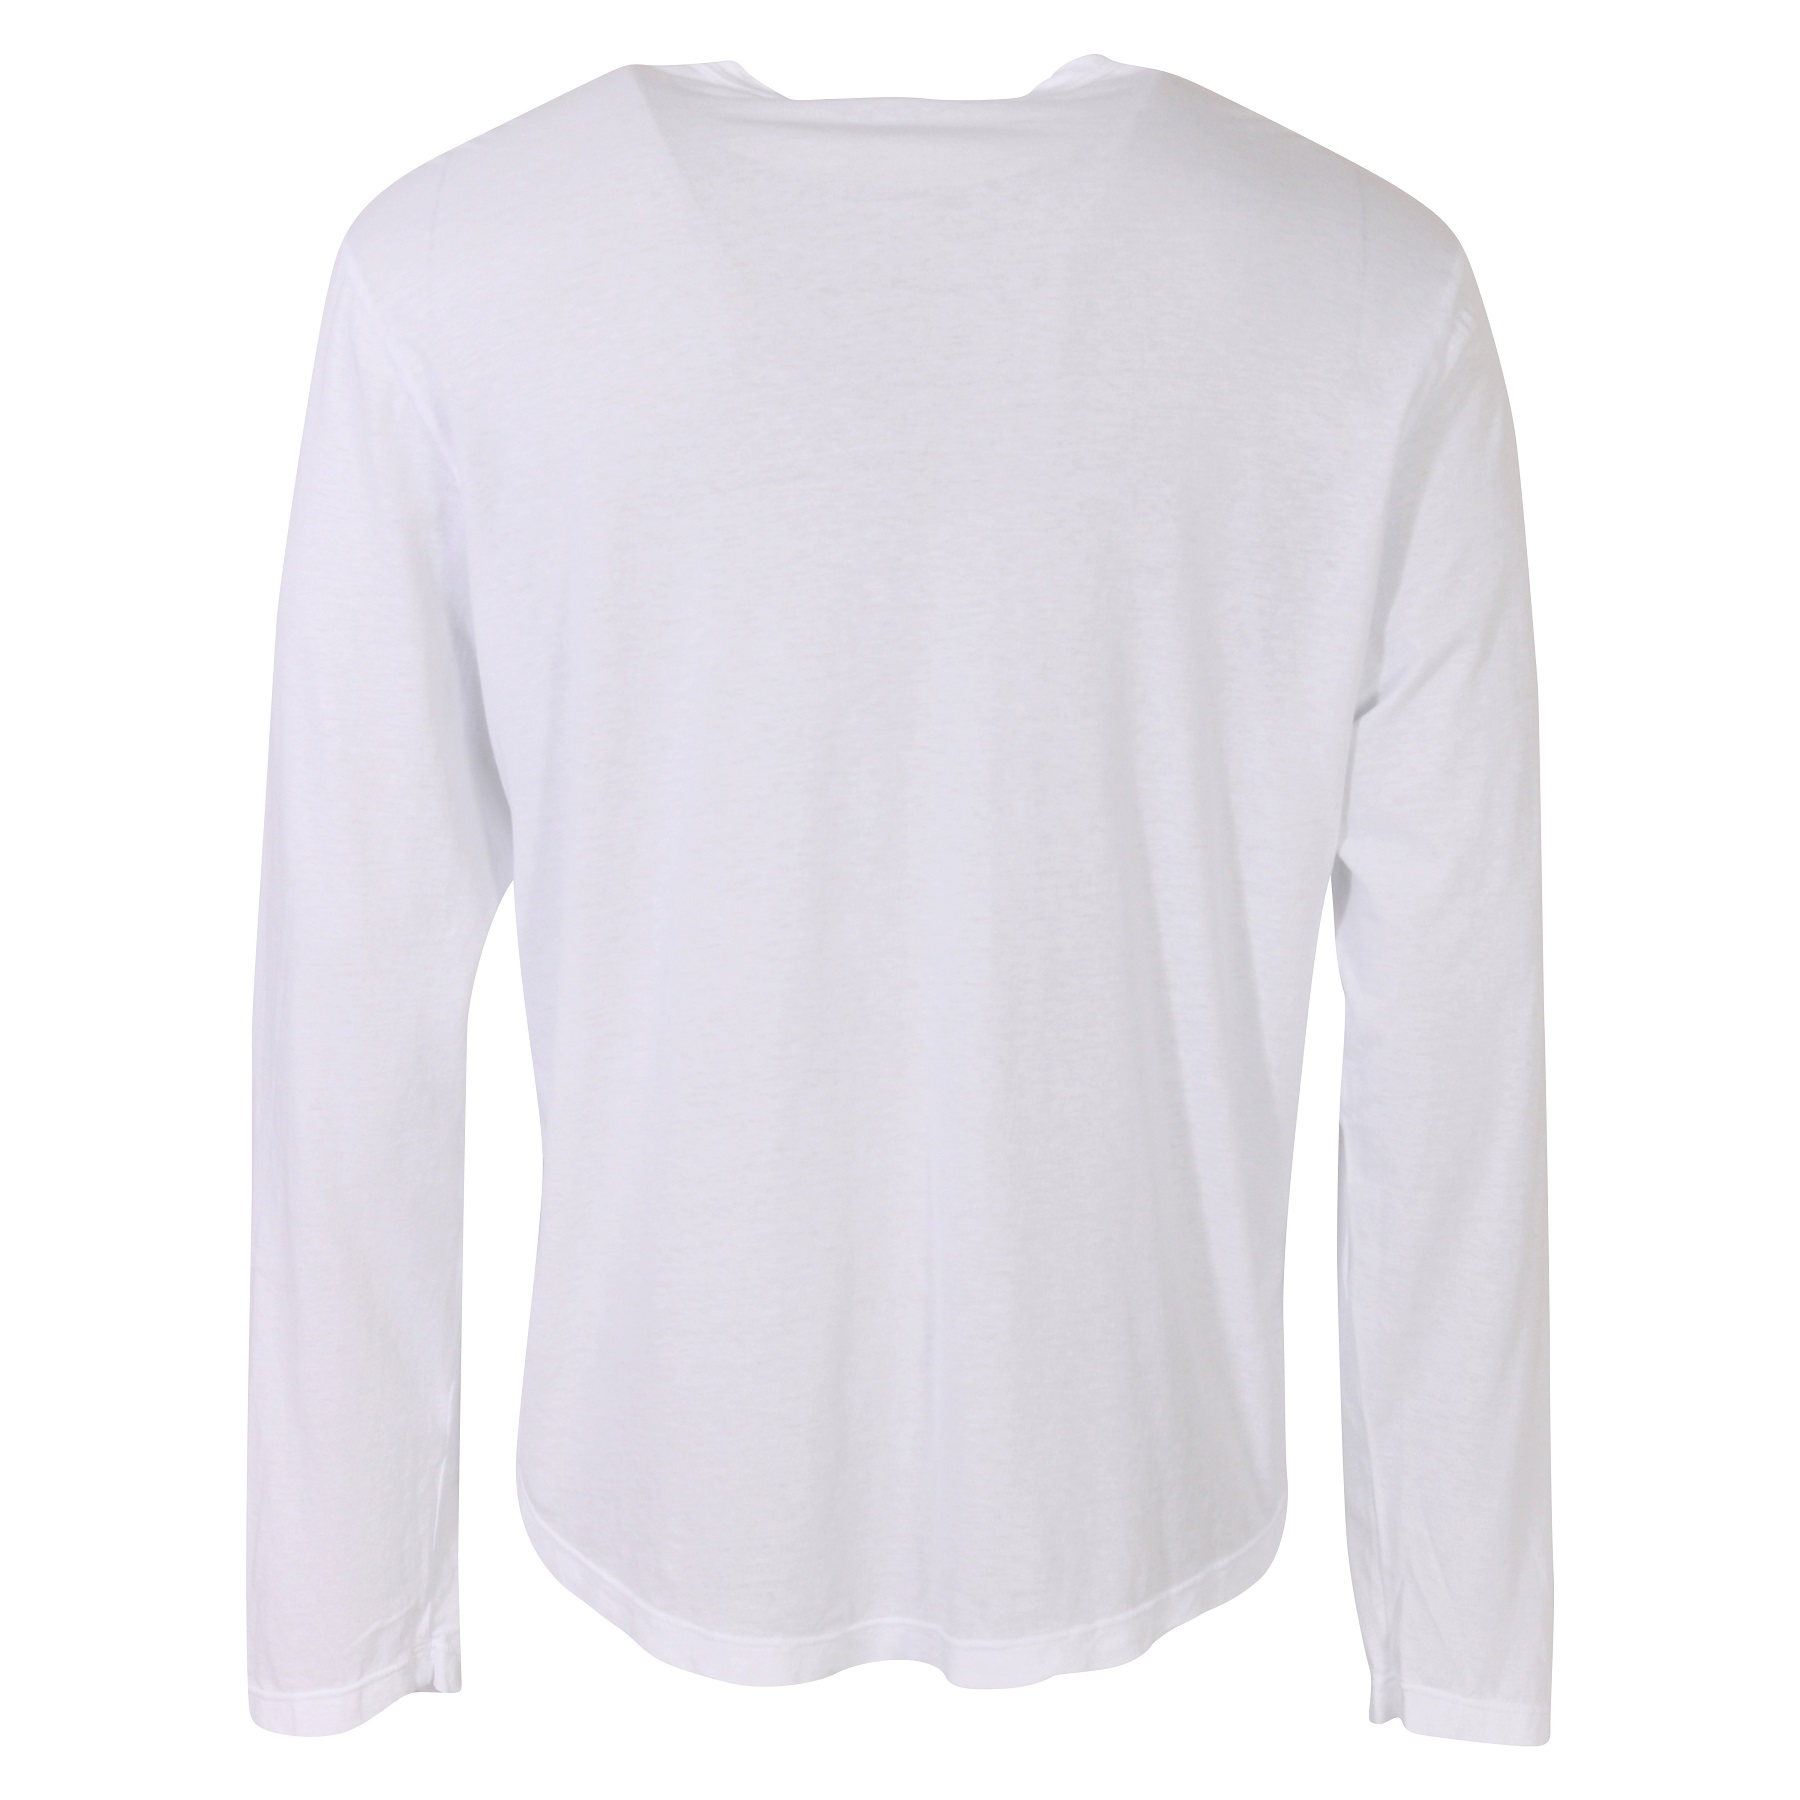 James Perse Clear Jersey Longsleeve Crewneck White 2XL/5